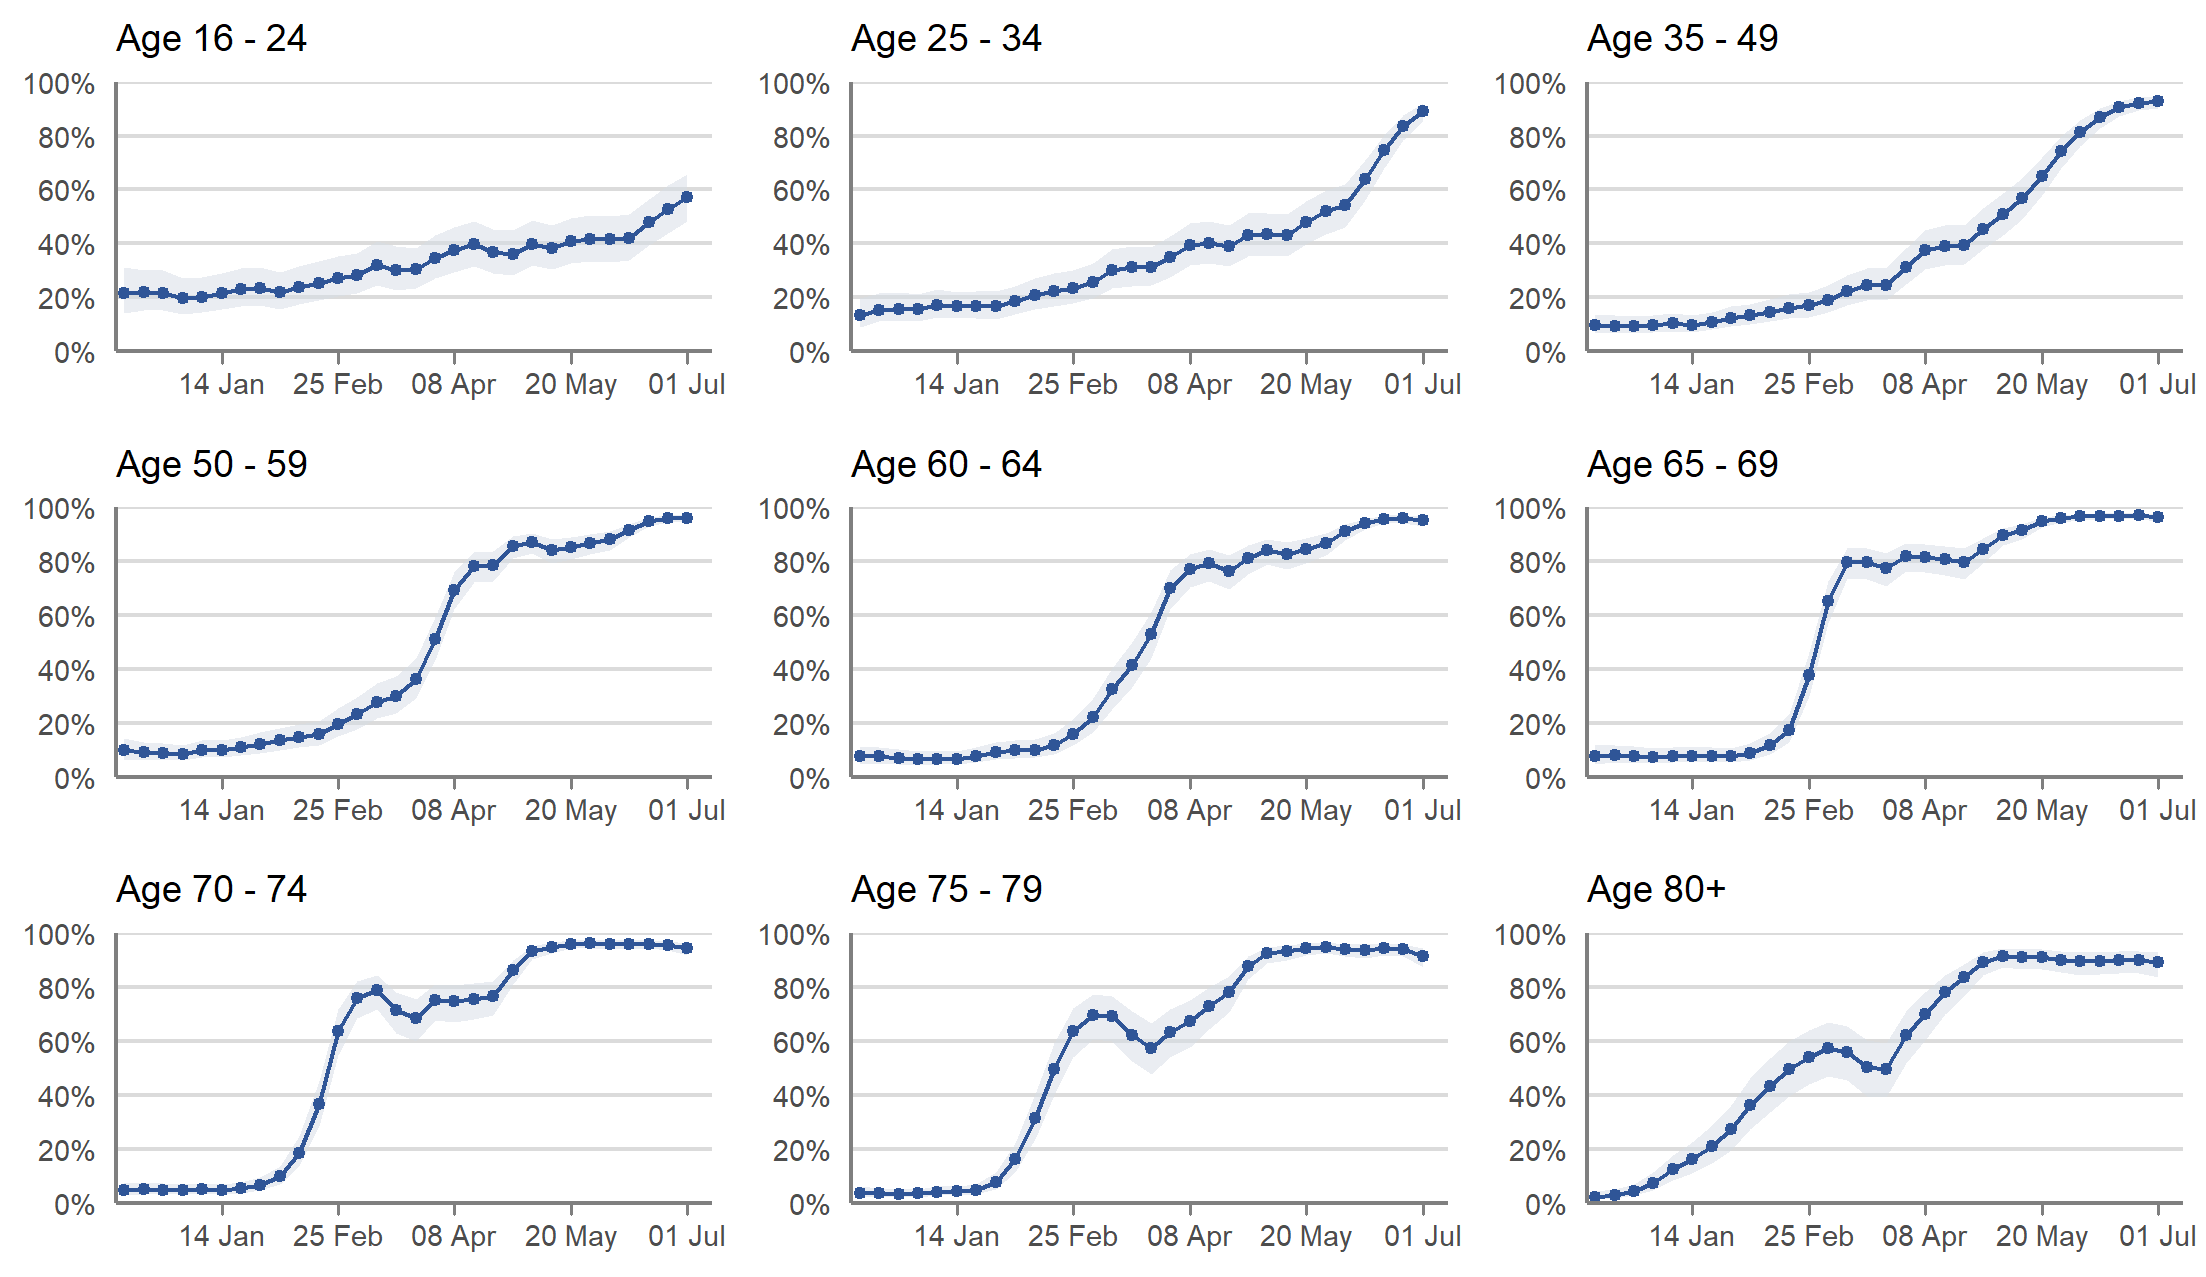 Figure 3: Modelled weekly percentage of people in the community population testing positive for antibodies to SARS-CoV-2 from a blood sample, by age group, from 7 December 2020 to the week beginning 28 June 2021, including 95% credible intervals